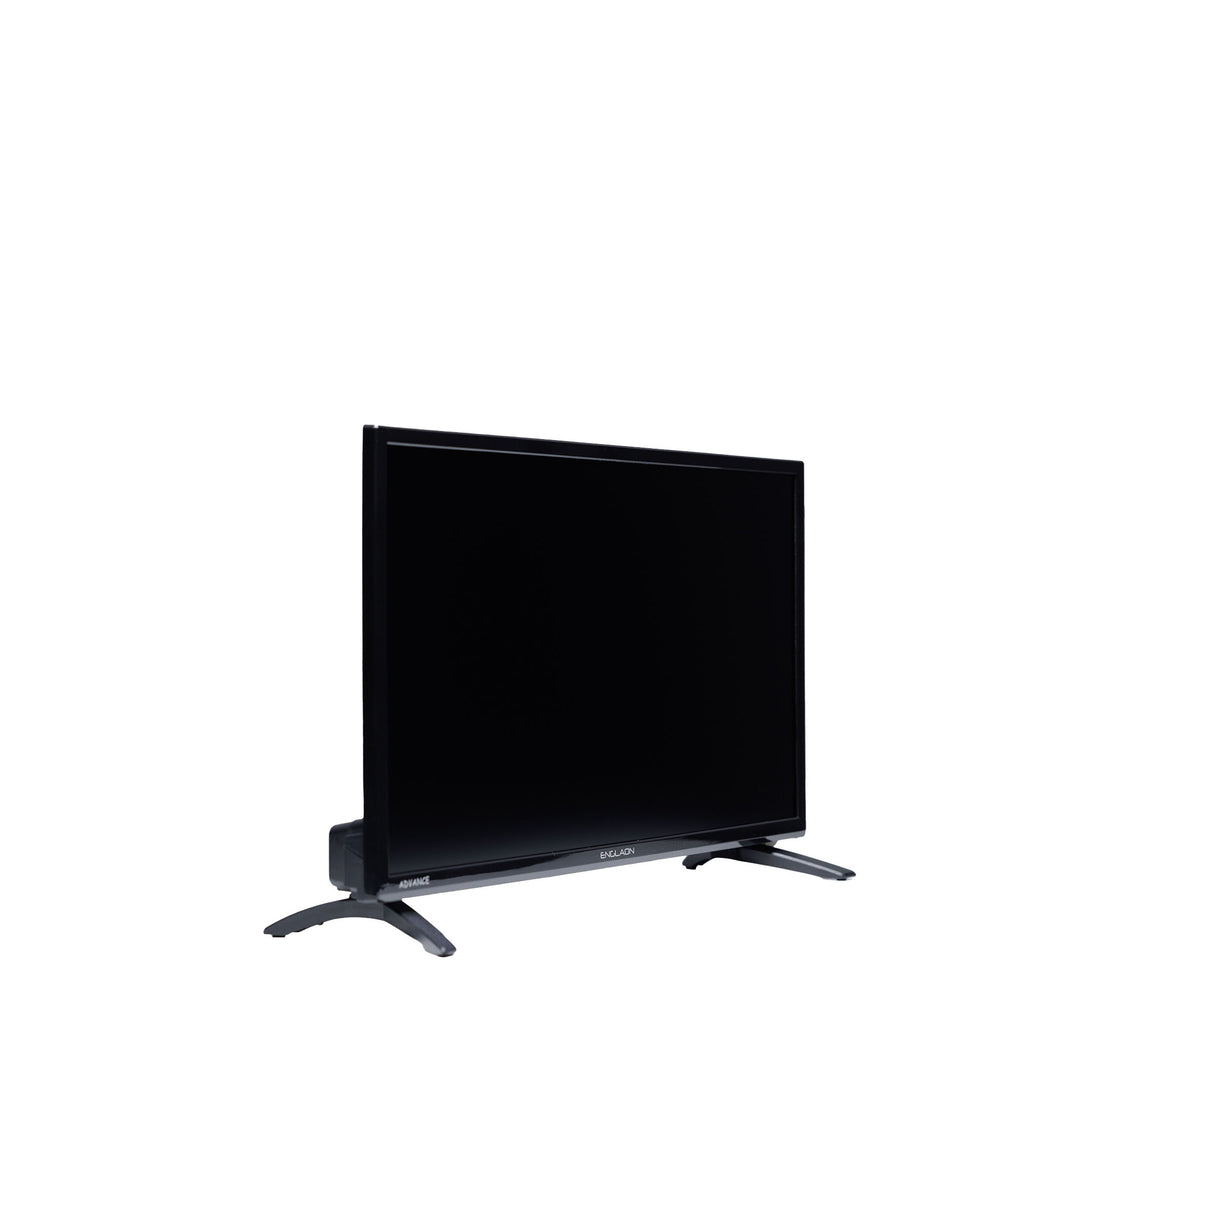 Seizo 24 LED 720p HD 12 Volt TV Combi with Built-in DVD Player with 12v  Adaptor, by ElectroeEmporium